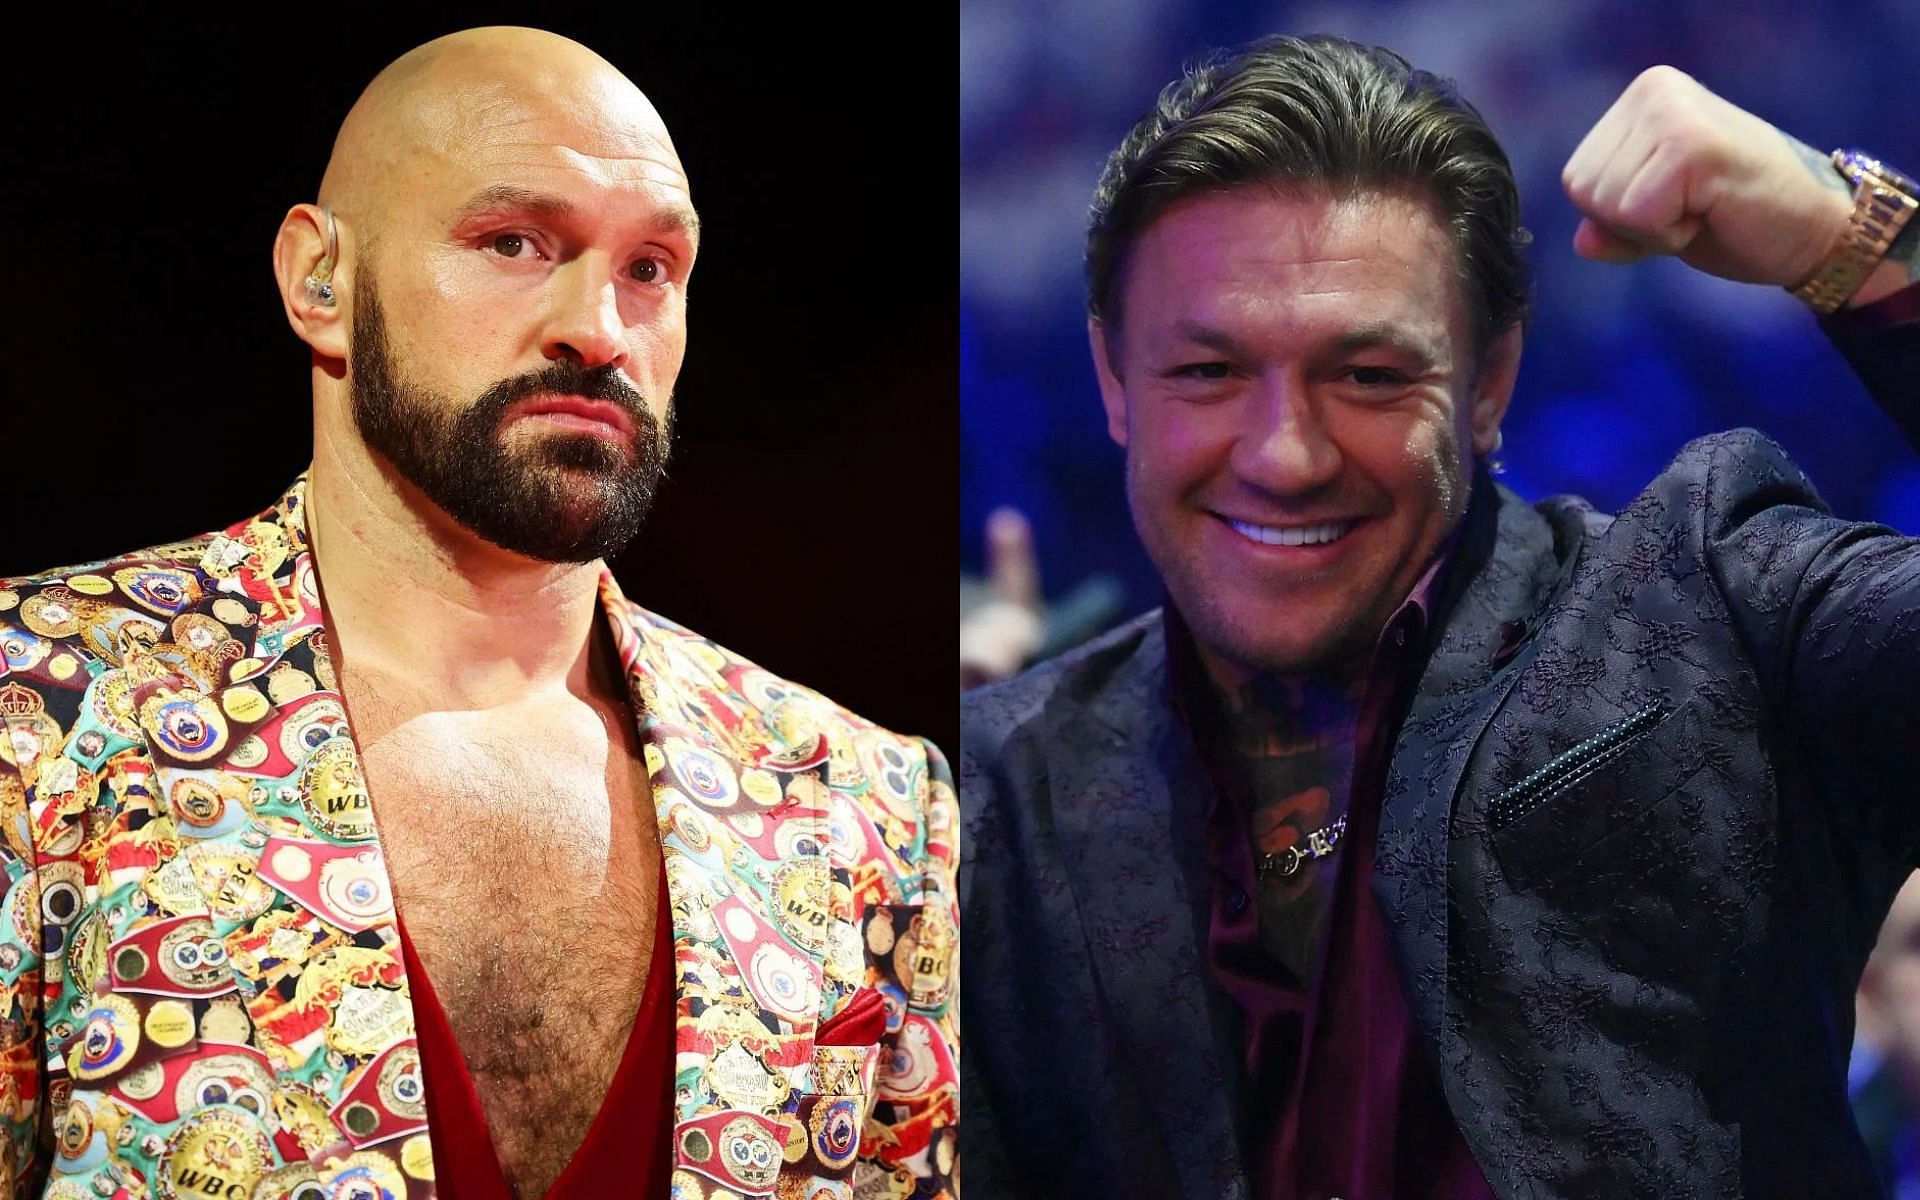 When Tyson Fury accused Conor McGregor of copying his style [Image courtesy: Getty Images]